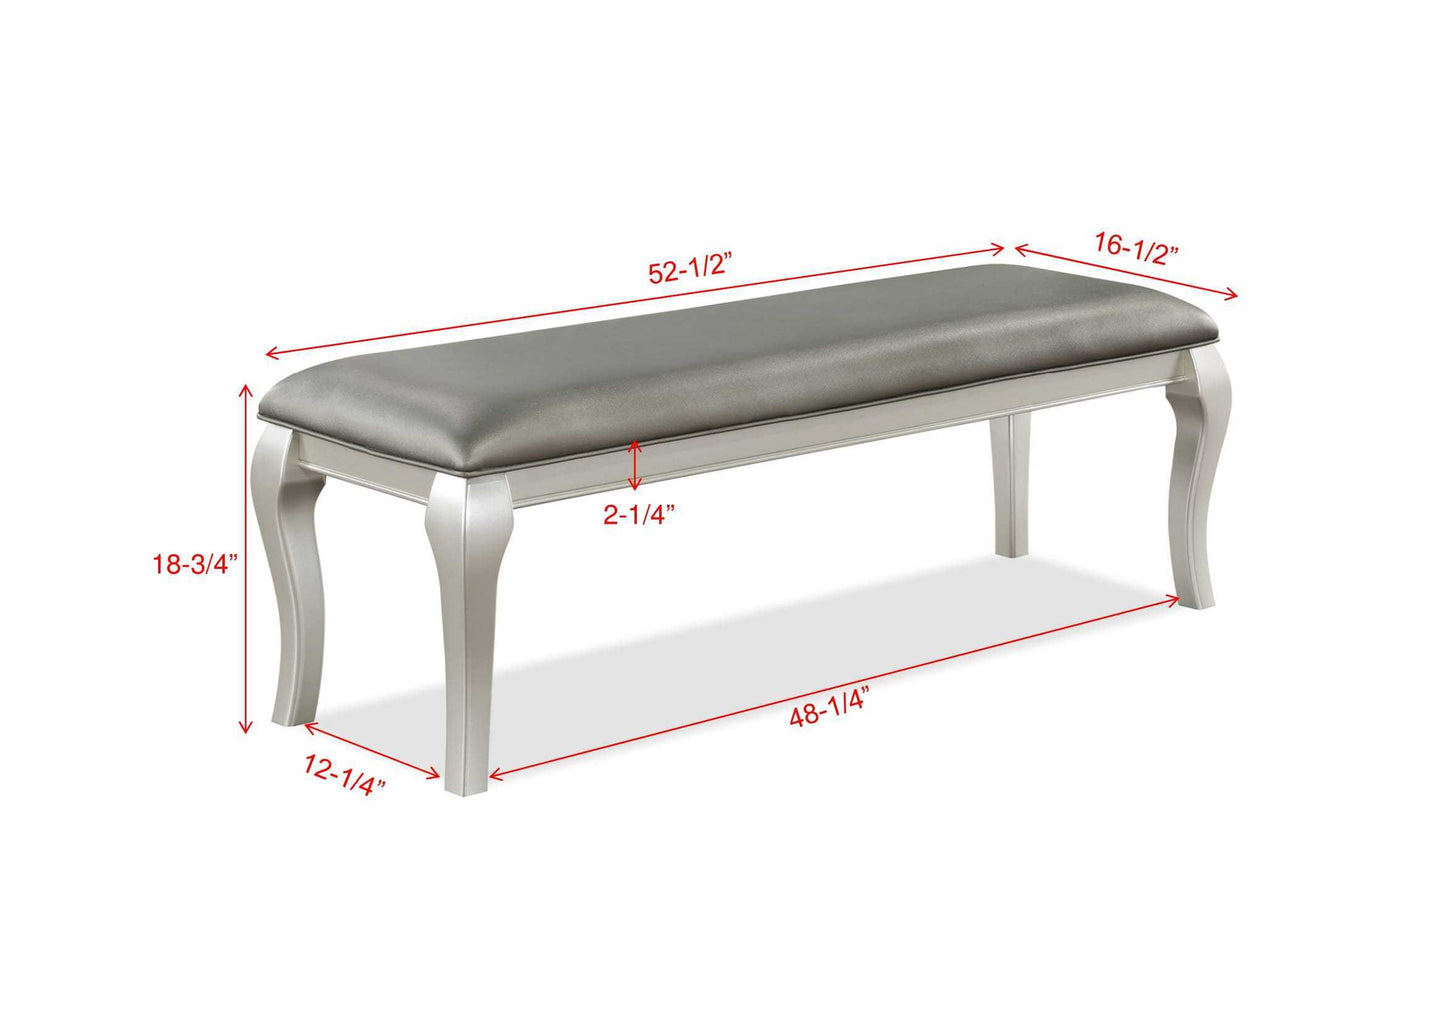 1-Pc Modern Luxury Contemporary Faux Leather Upholstered Dining Bench Silver Champagne Finish Furniture Bedroom Living Room Dining Room